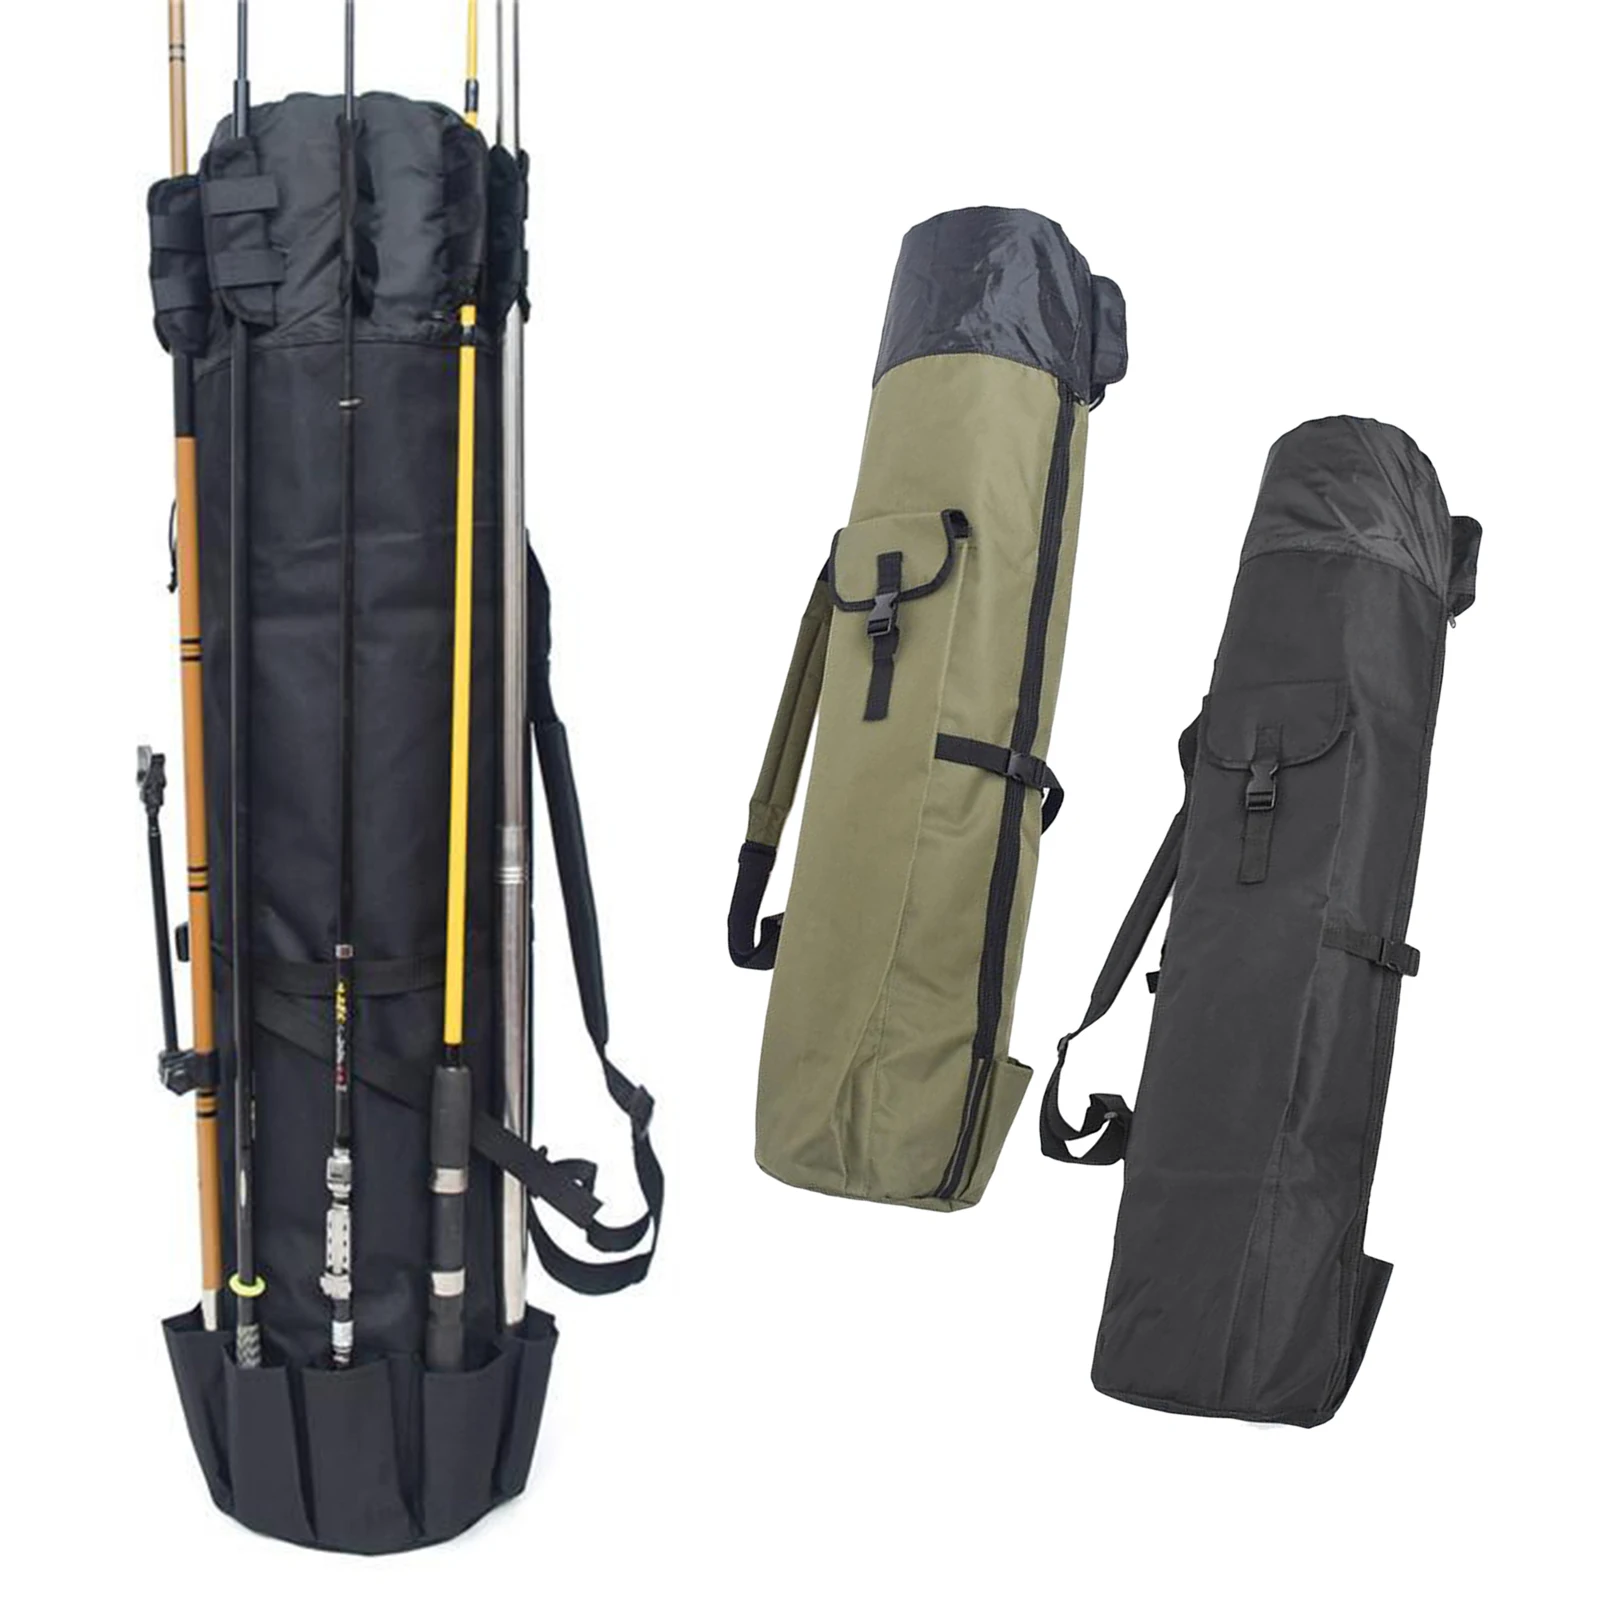 

Waterproof Fishing Tackle Bag Fishing Rods Holder Travel Reel Carry Case Pole Tools Storage Bags Holds 5 Poles